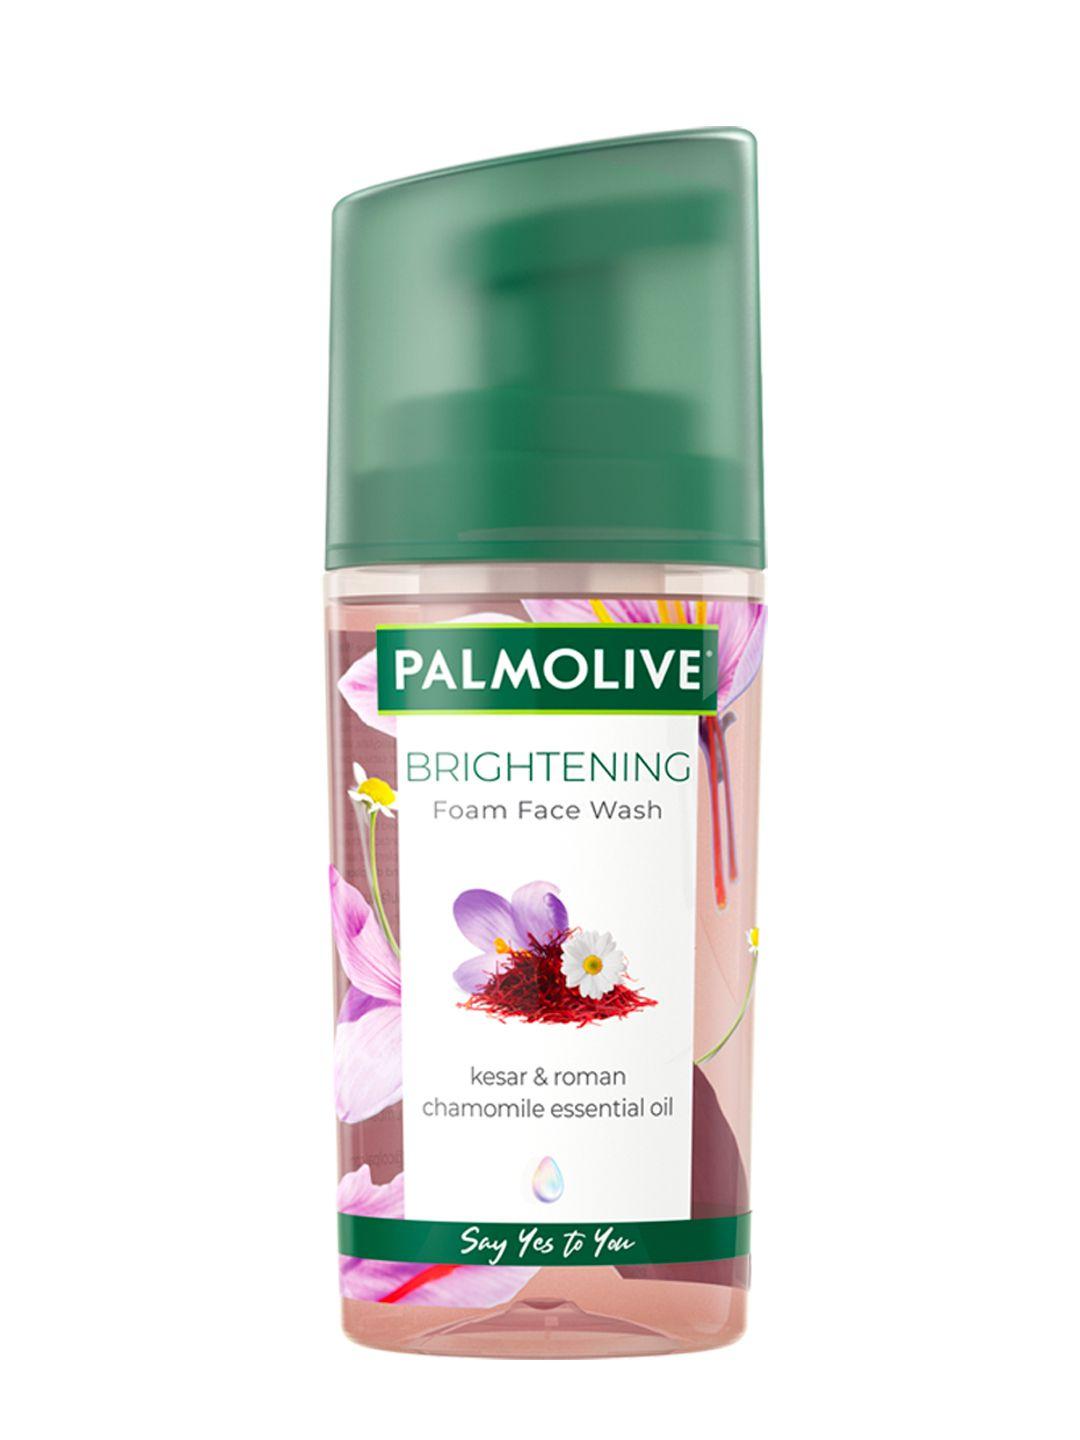 palmolive brightening foam face wash with kesar & chamomile essential oil - 100ml